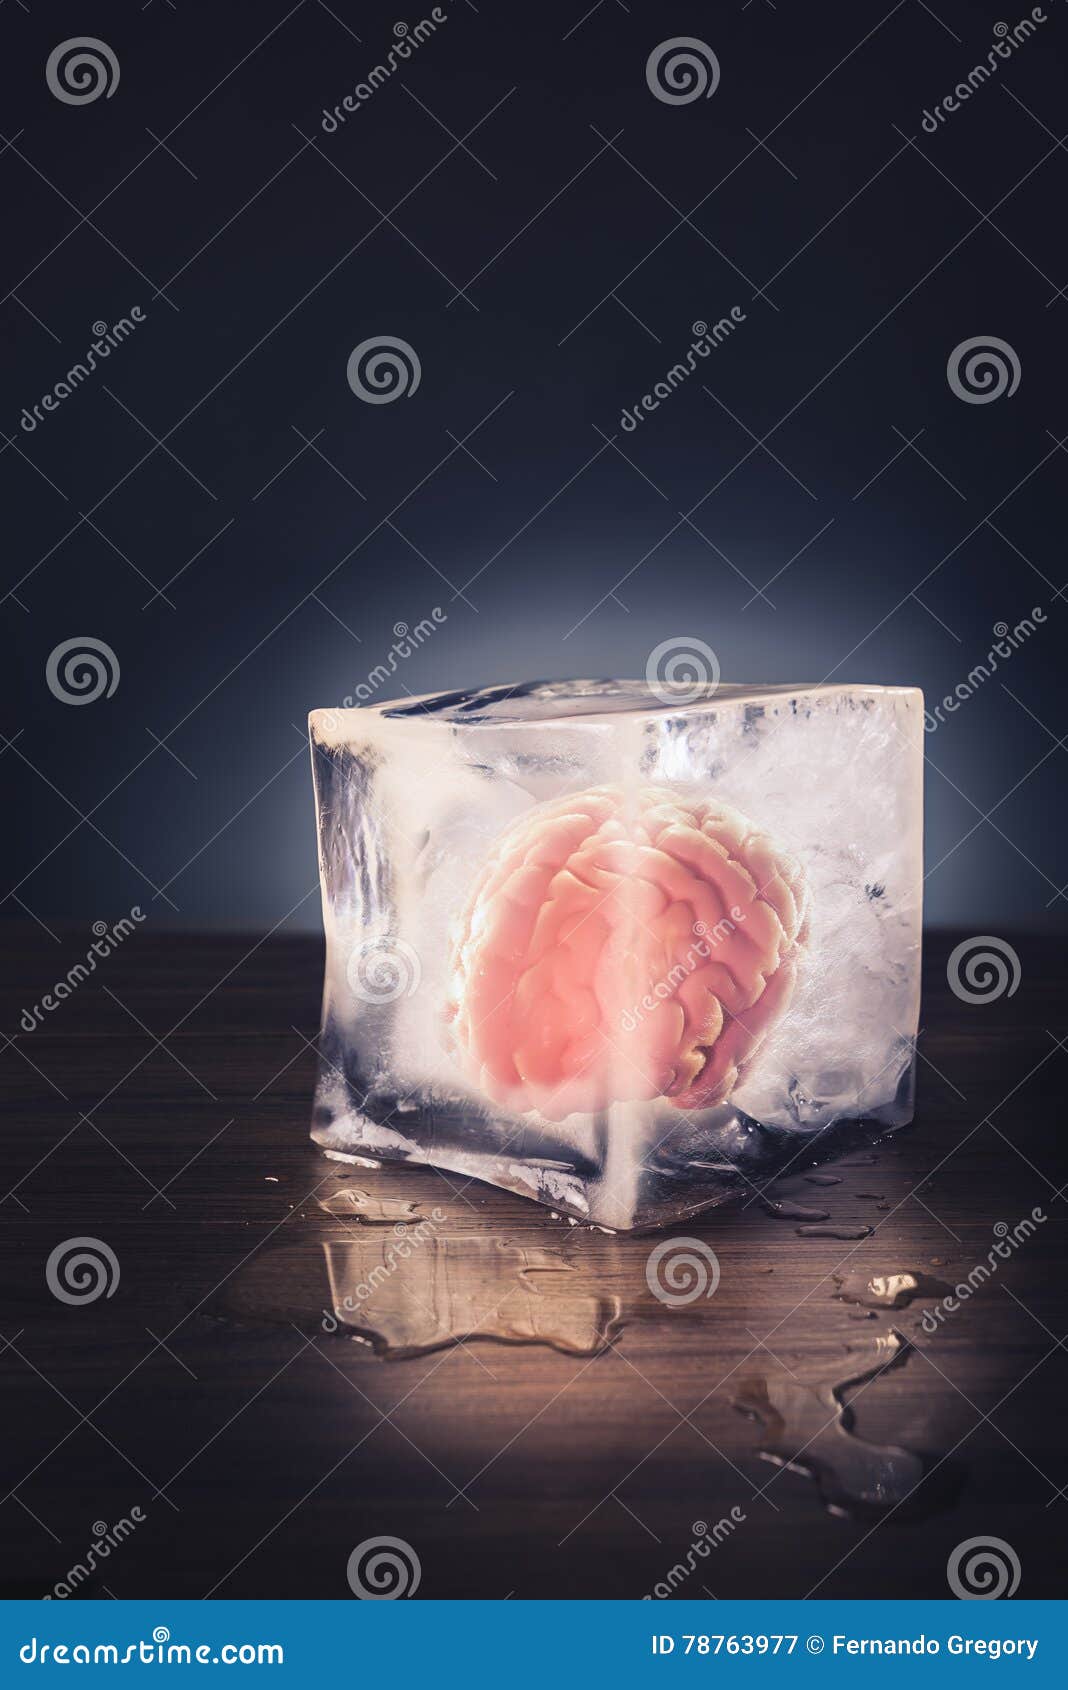 brain freeze concept with dramatic lighting